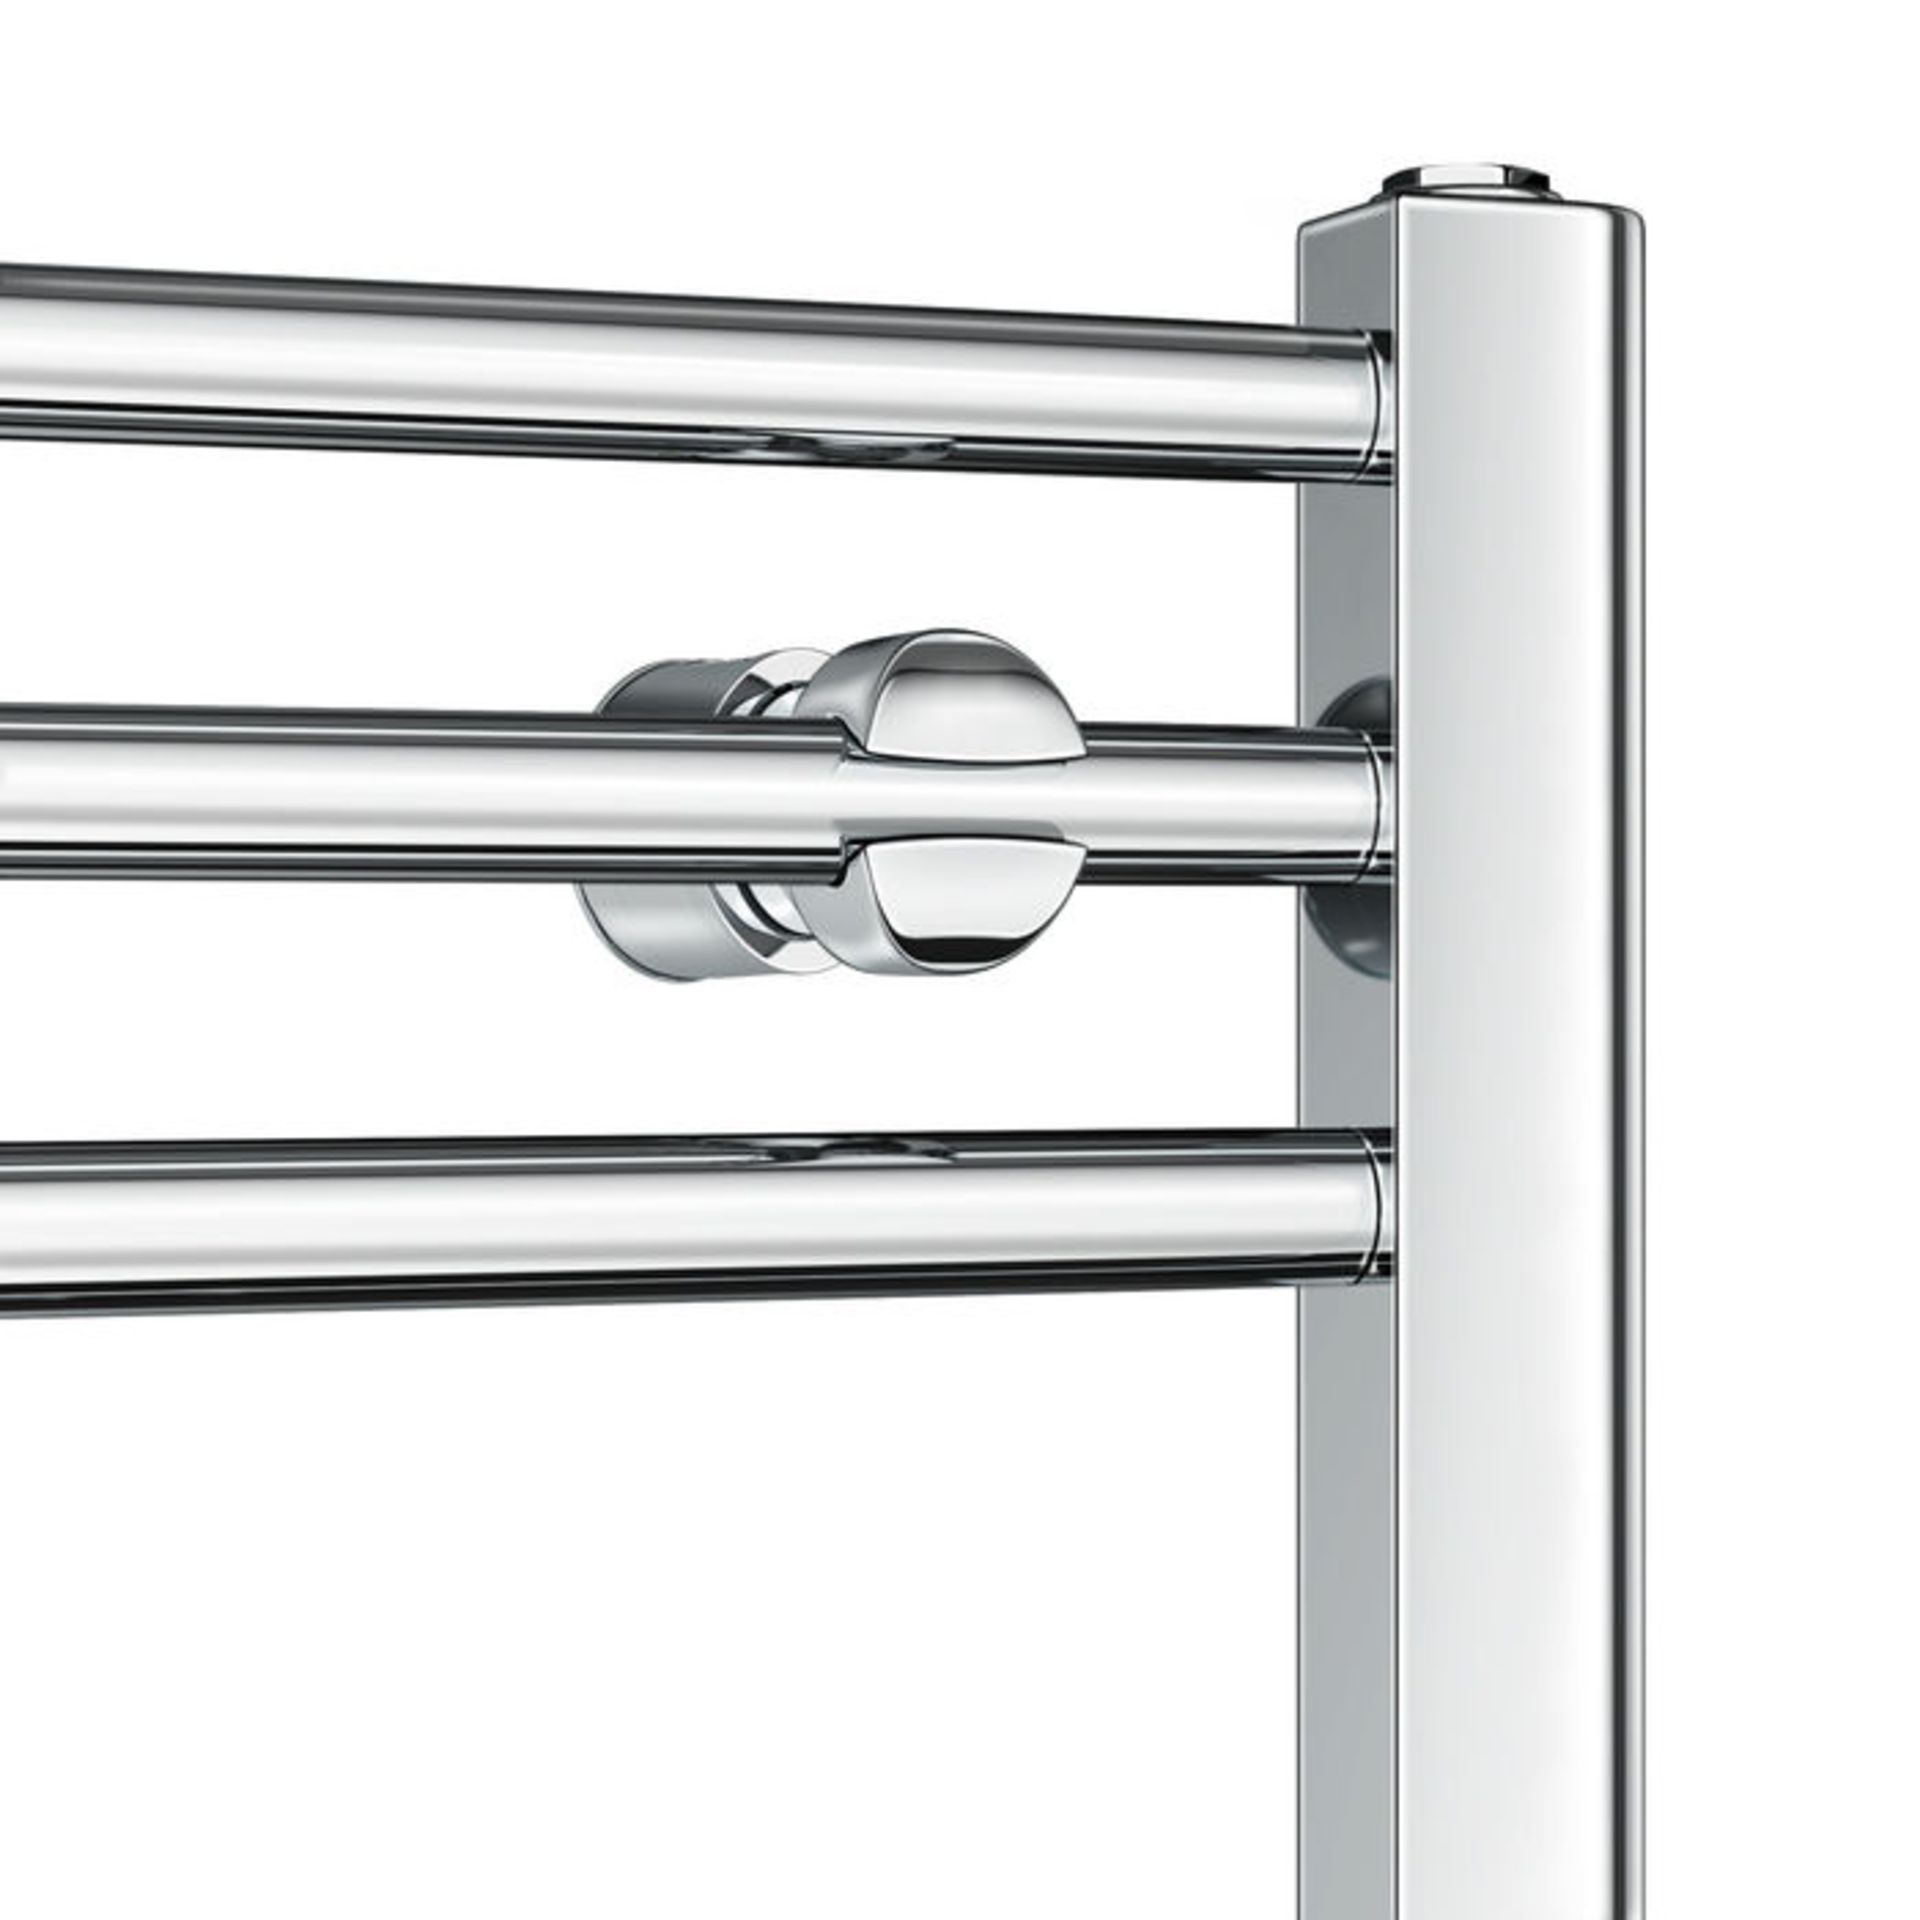 (XM80) 800x600mm - 20mm Tubes - Chrome Heated Straight Rail Ladder Towel Radiator. Low carbon - Image 4 of 4